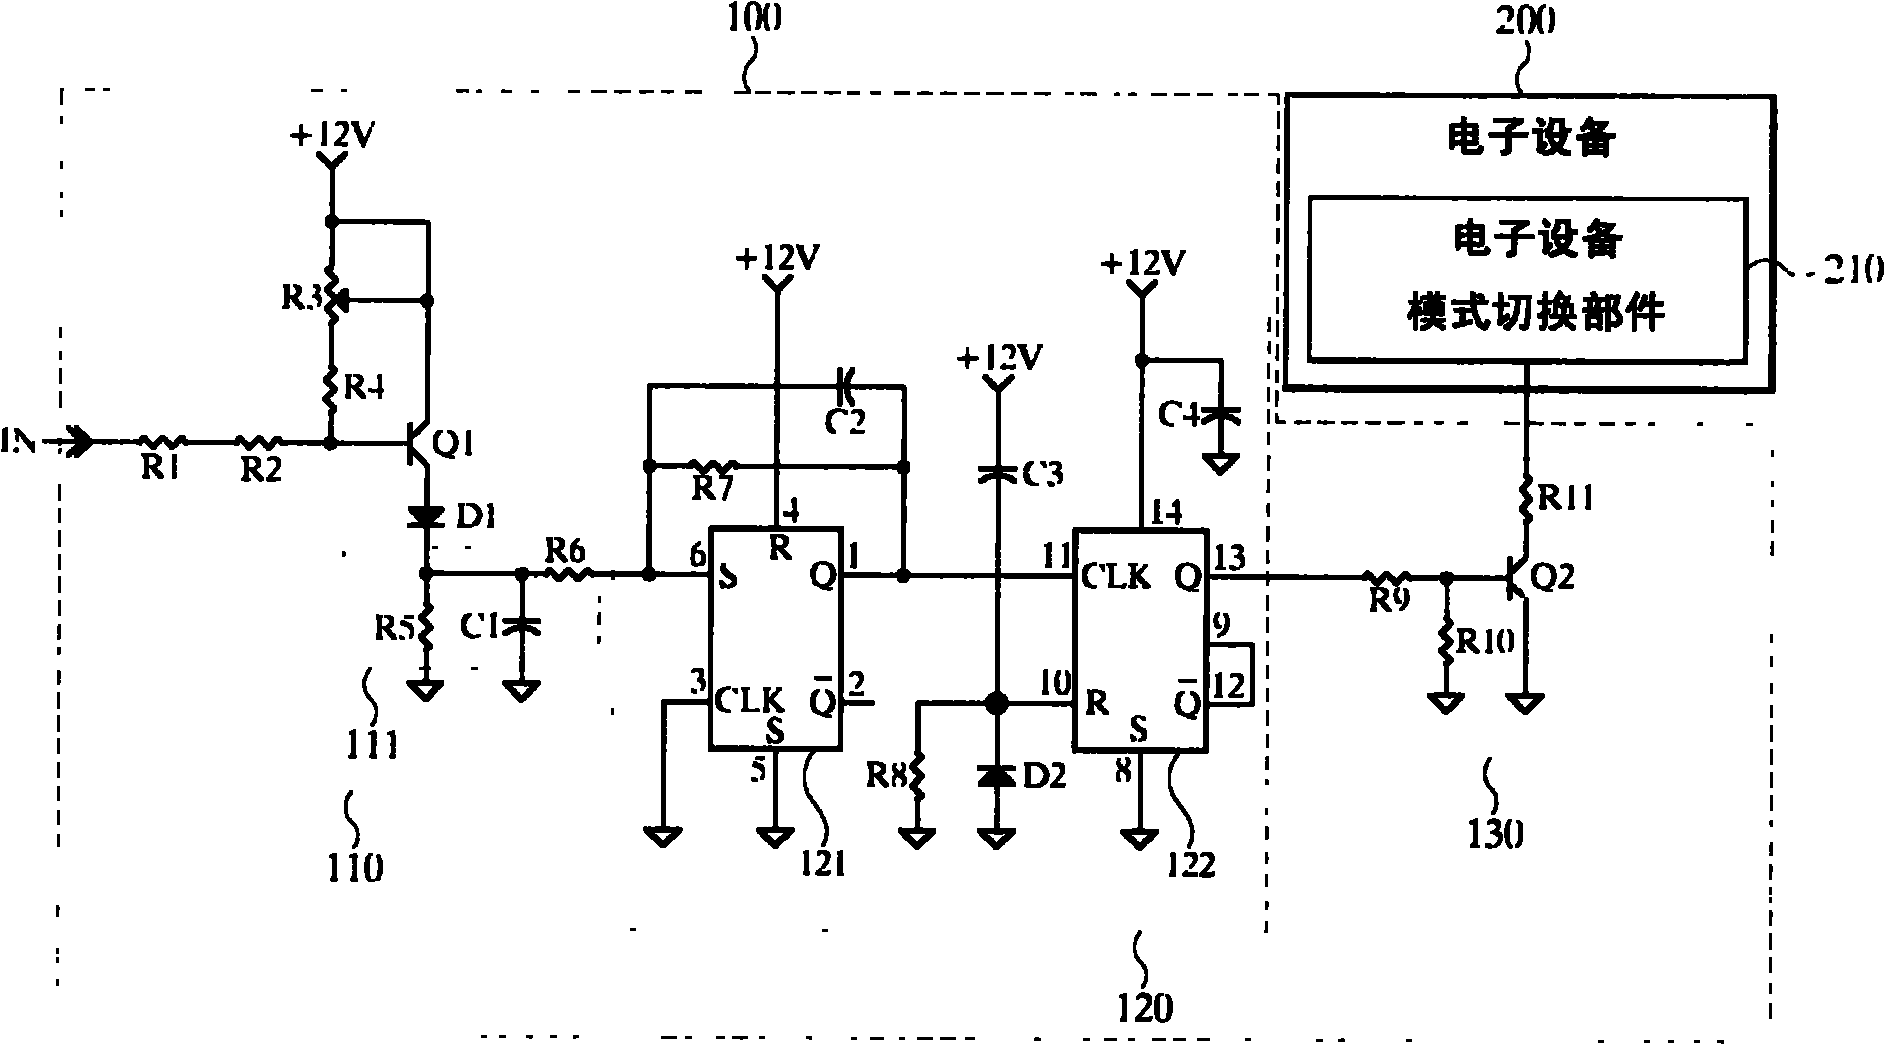 Electronic equipment mode switching apparatus and method based on skin contact